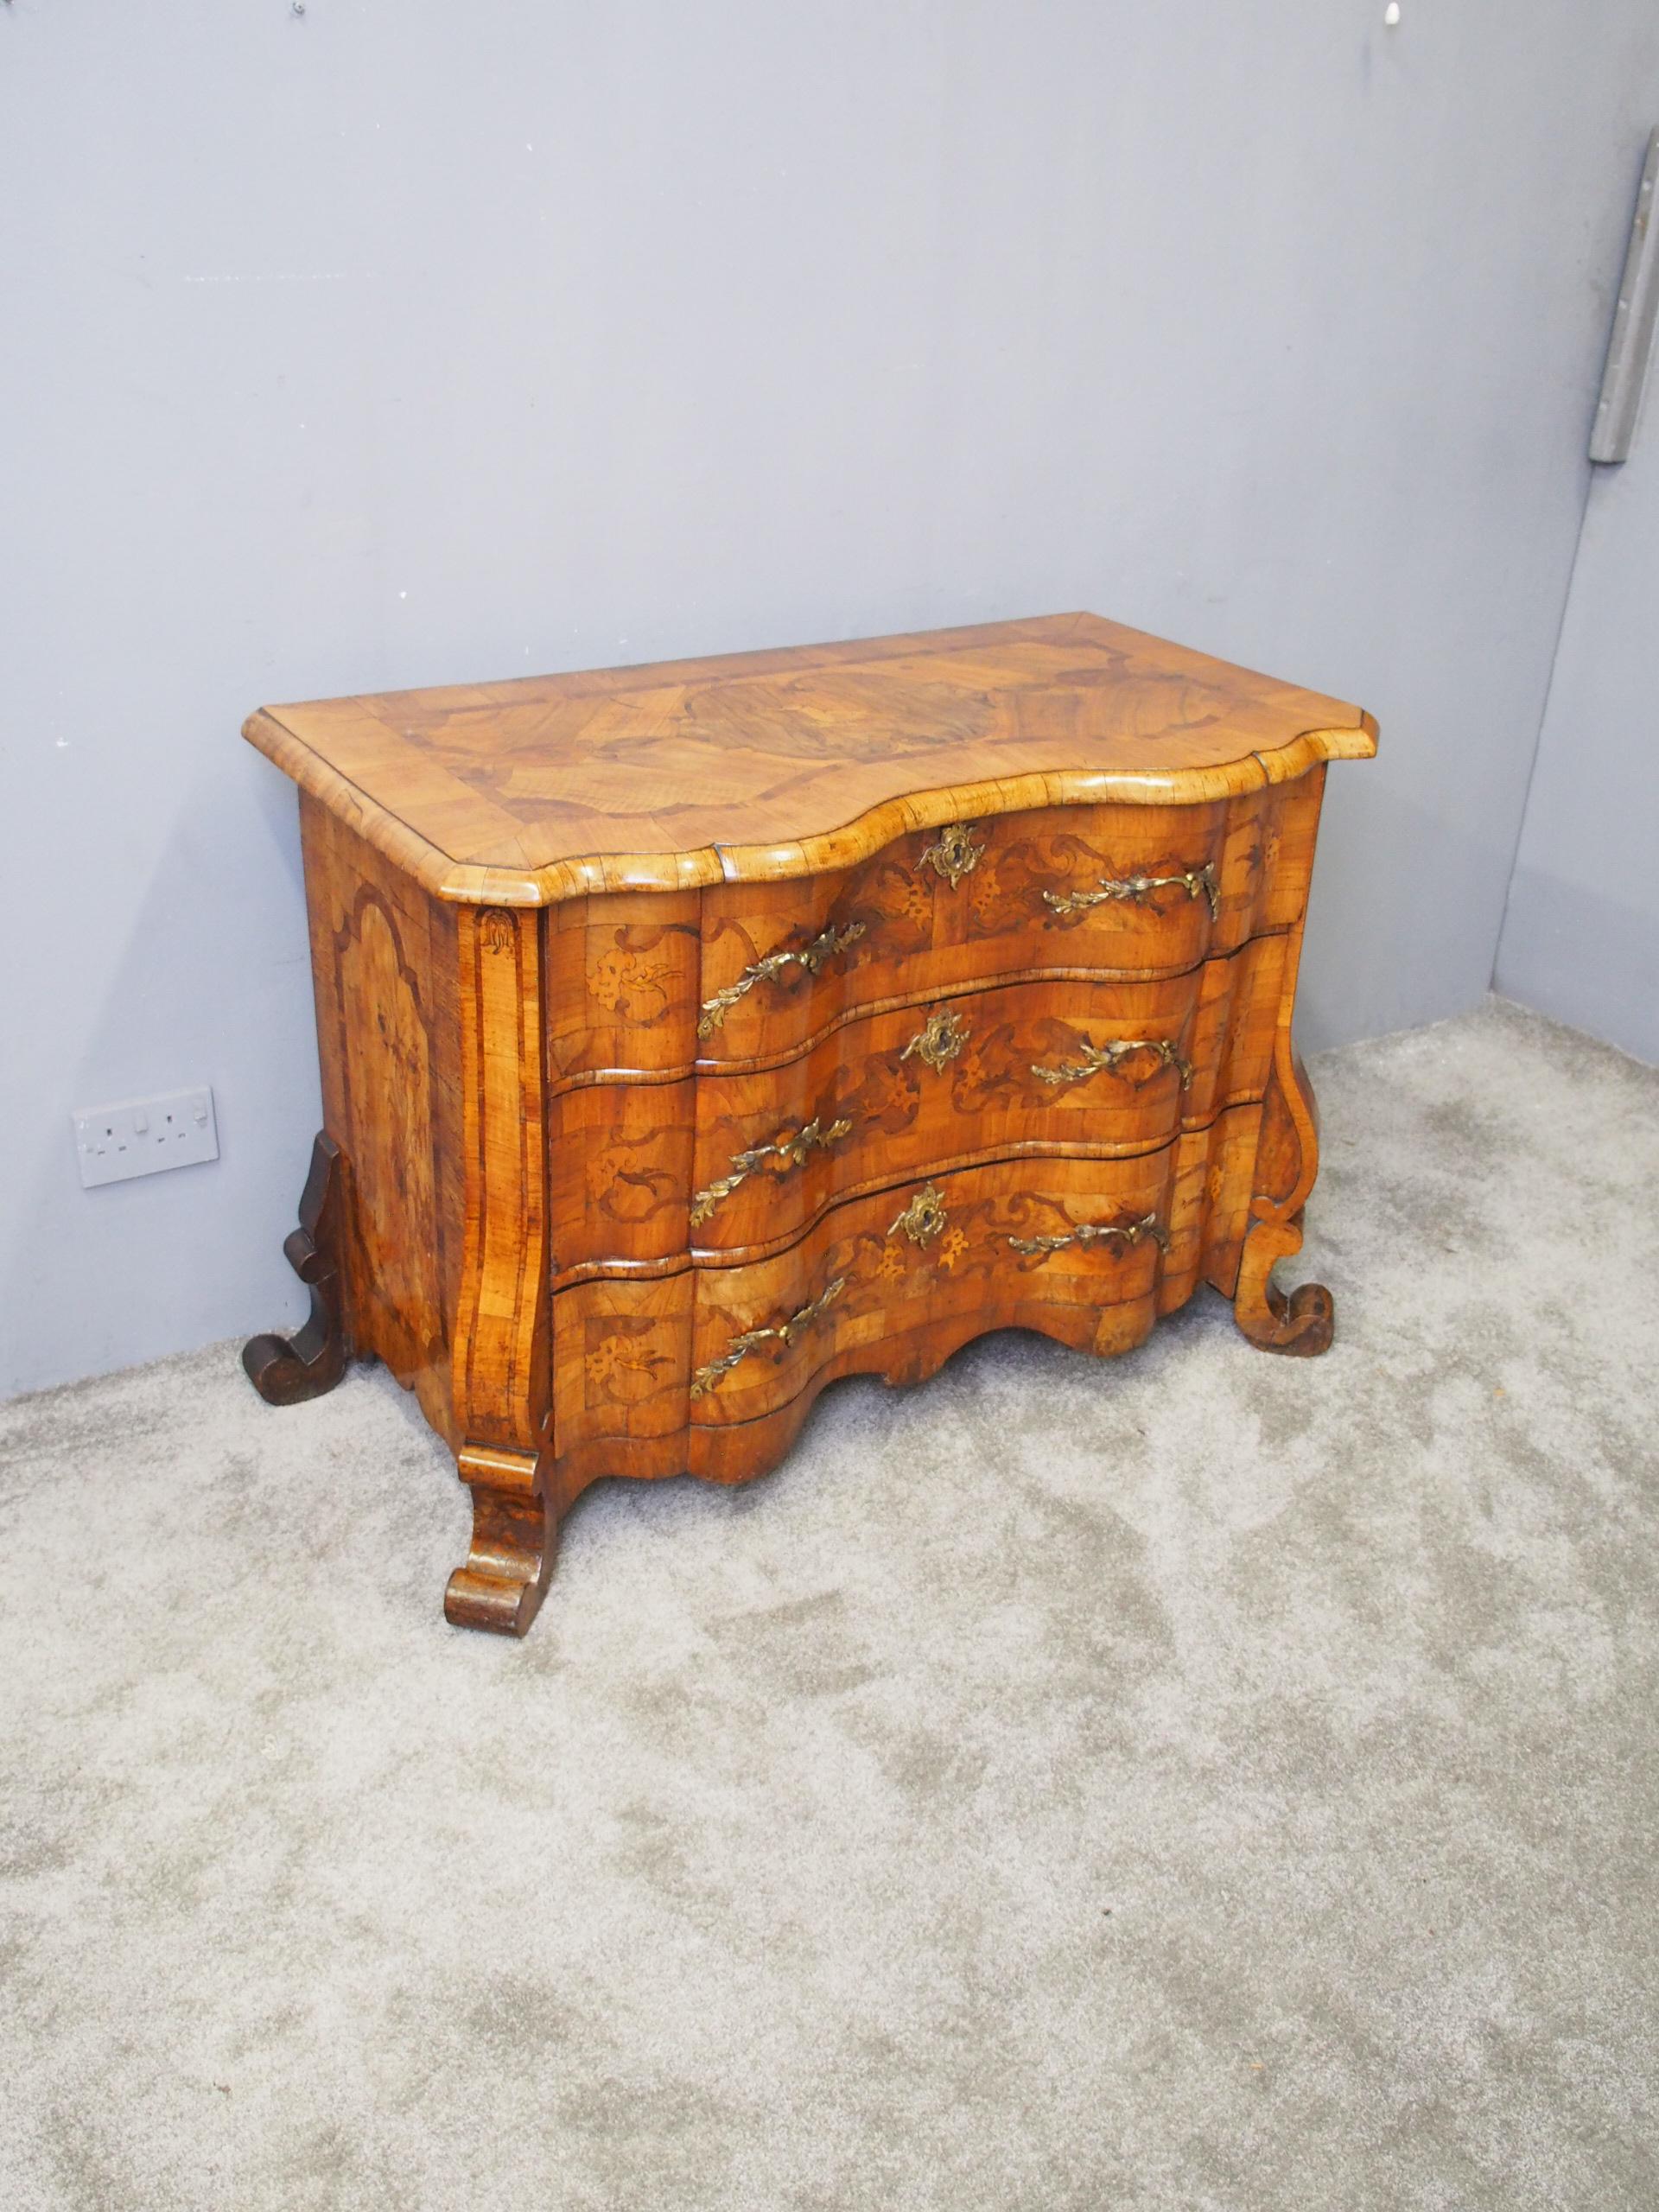 Neat sized walnut serpentine front North Italian commode. The shaped top has cross banded sections to the centre, inlaid with a mythical bird design and a half round molded edge. Beneath is a configuration of 3 shaped drawers, inlaid with various